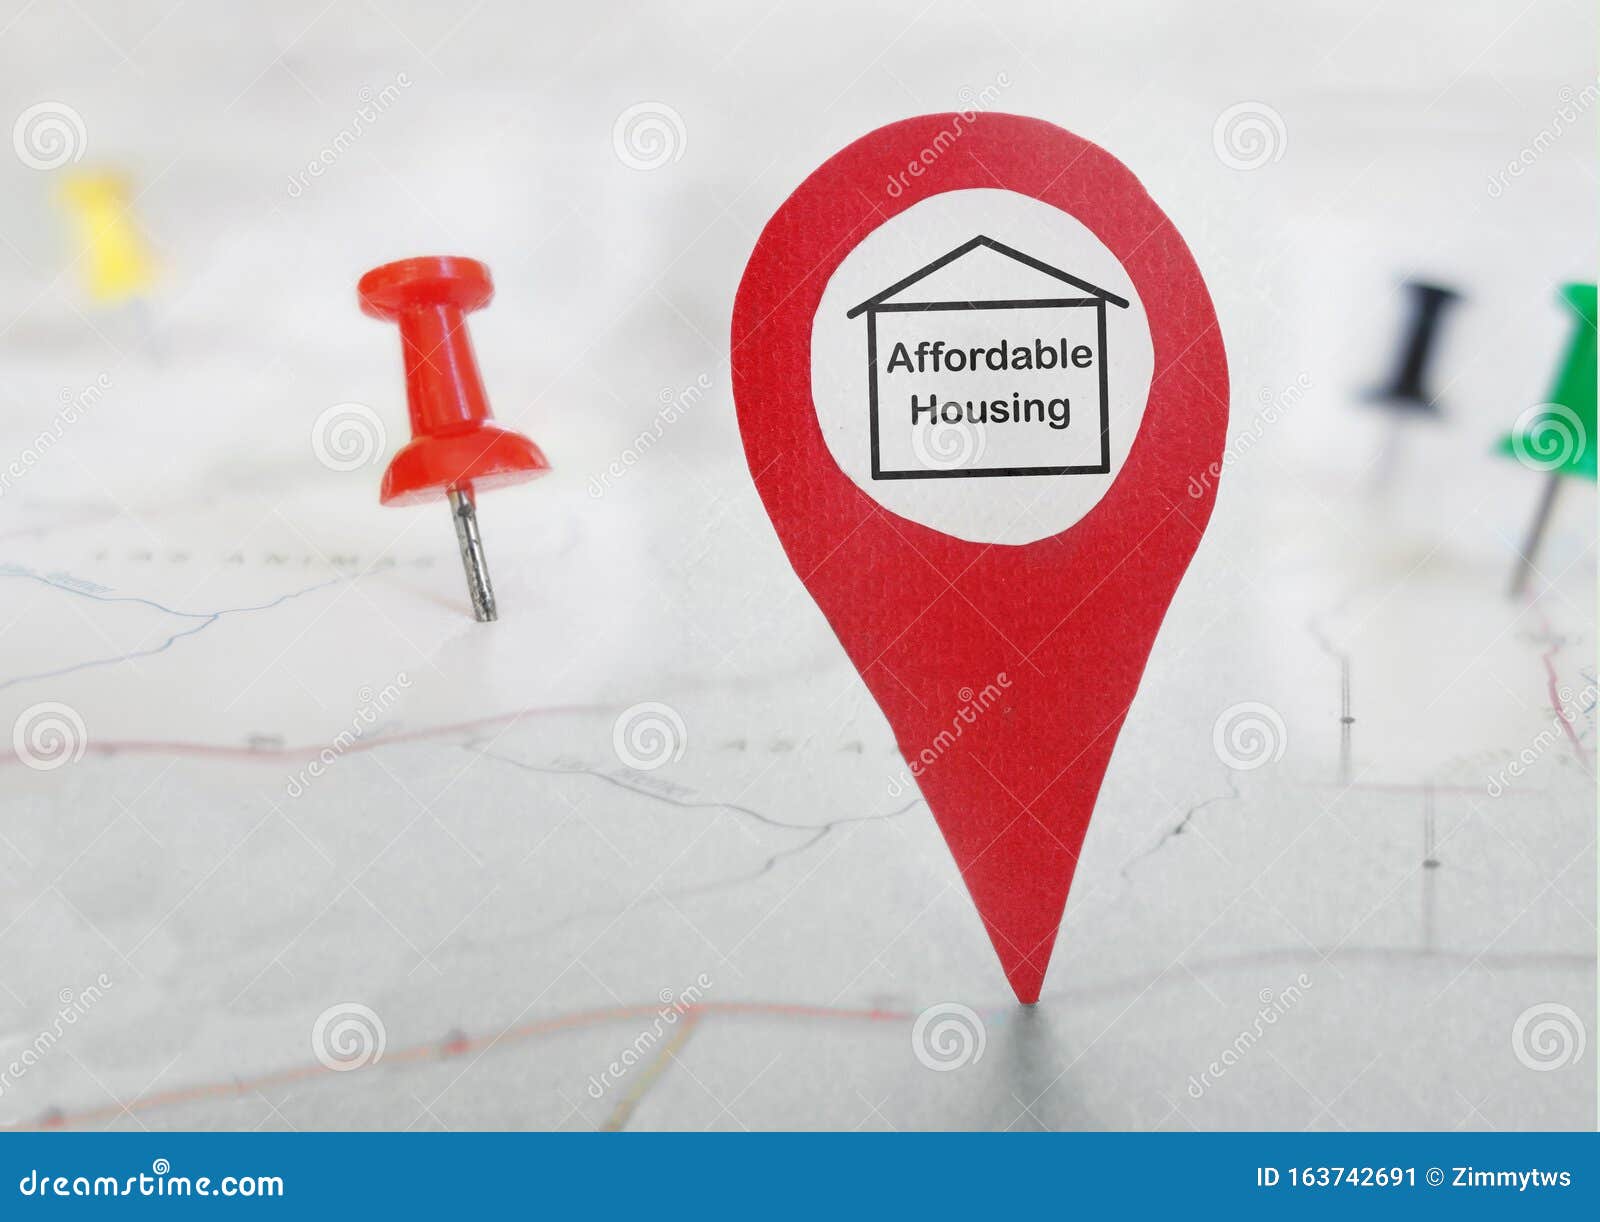 affordable housing locator map